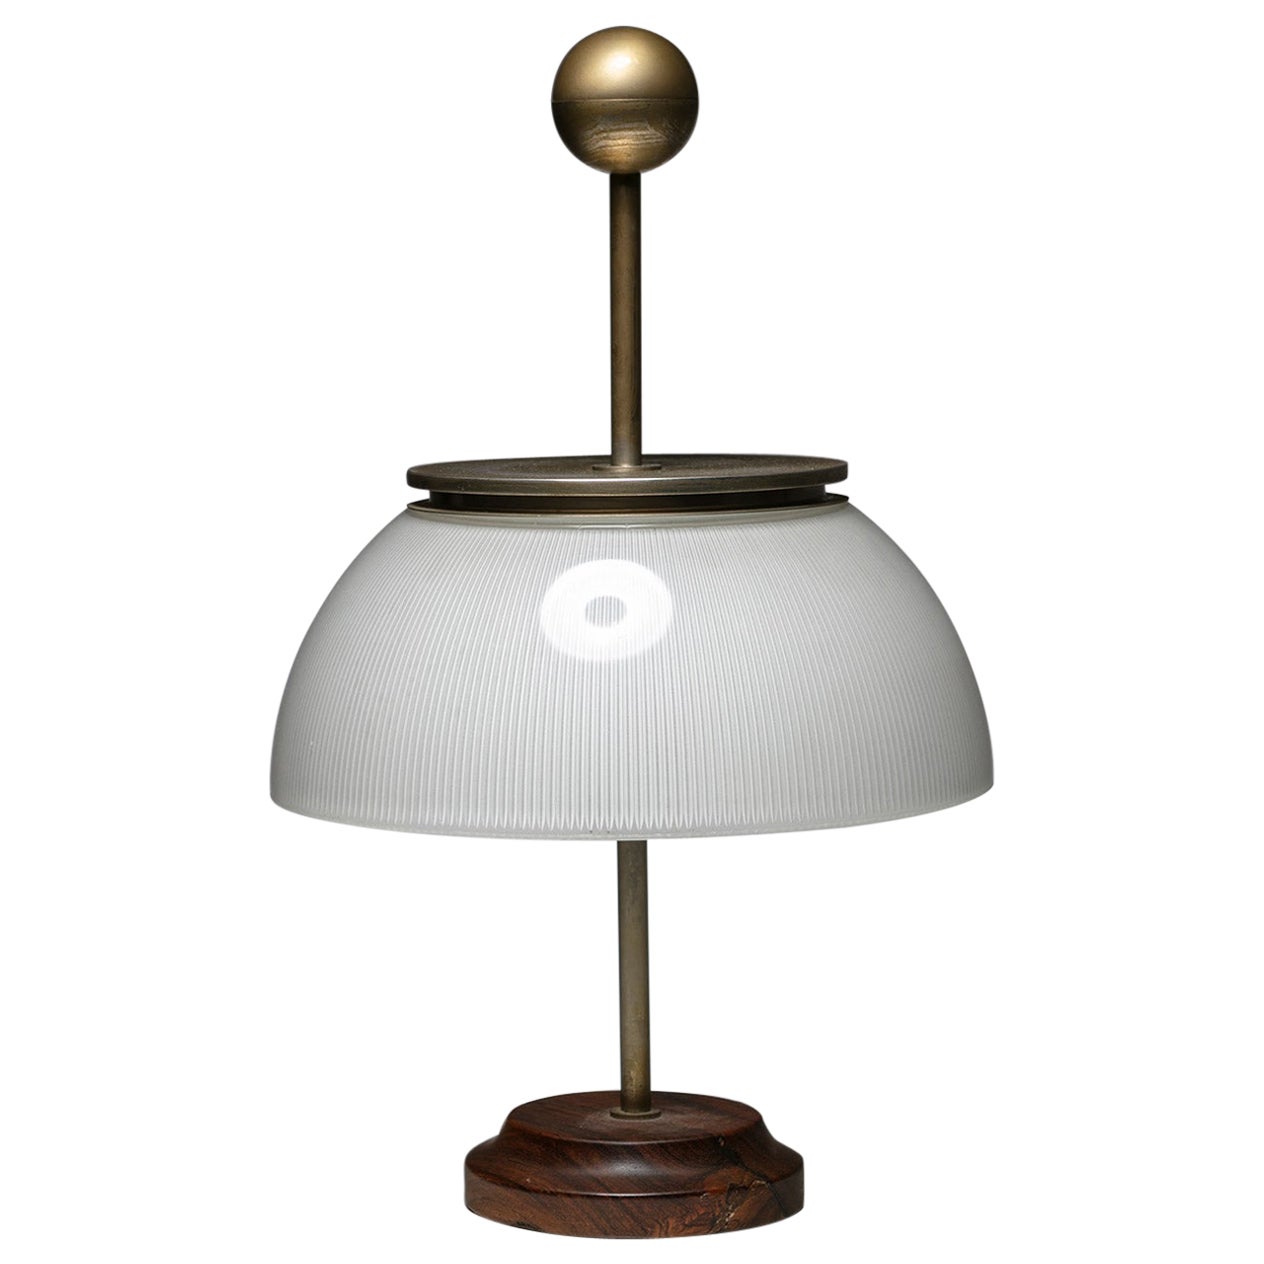 Rare "Alfa" Glass Table Lamp, Wood Base, by Mazza for Artemide, Italy, 1960s For Sale